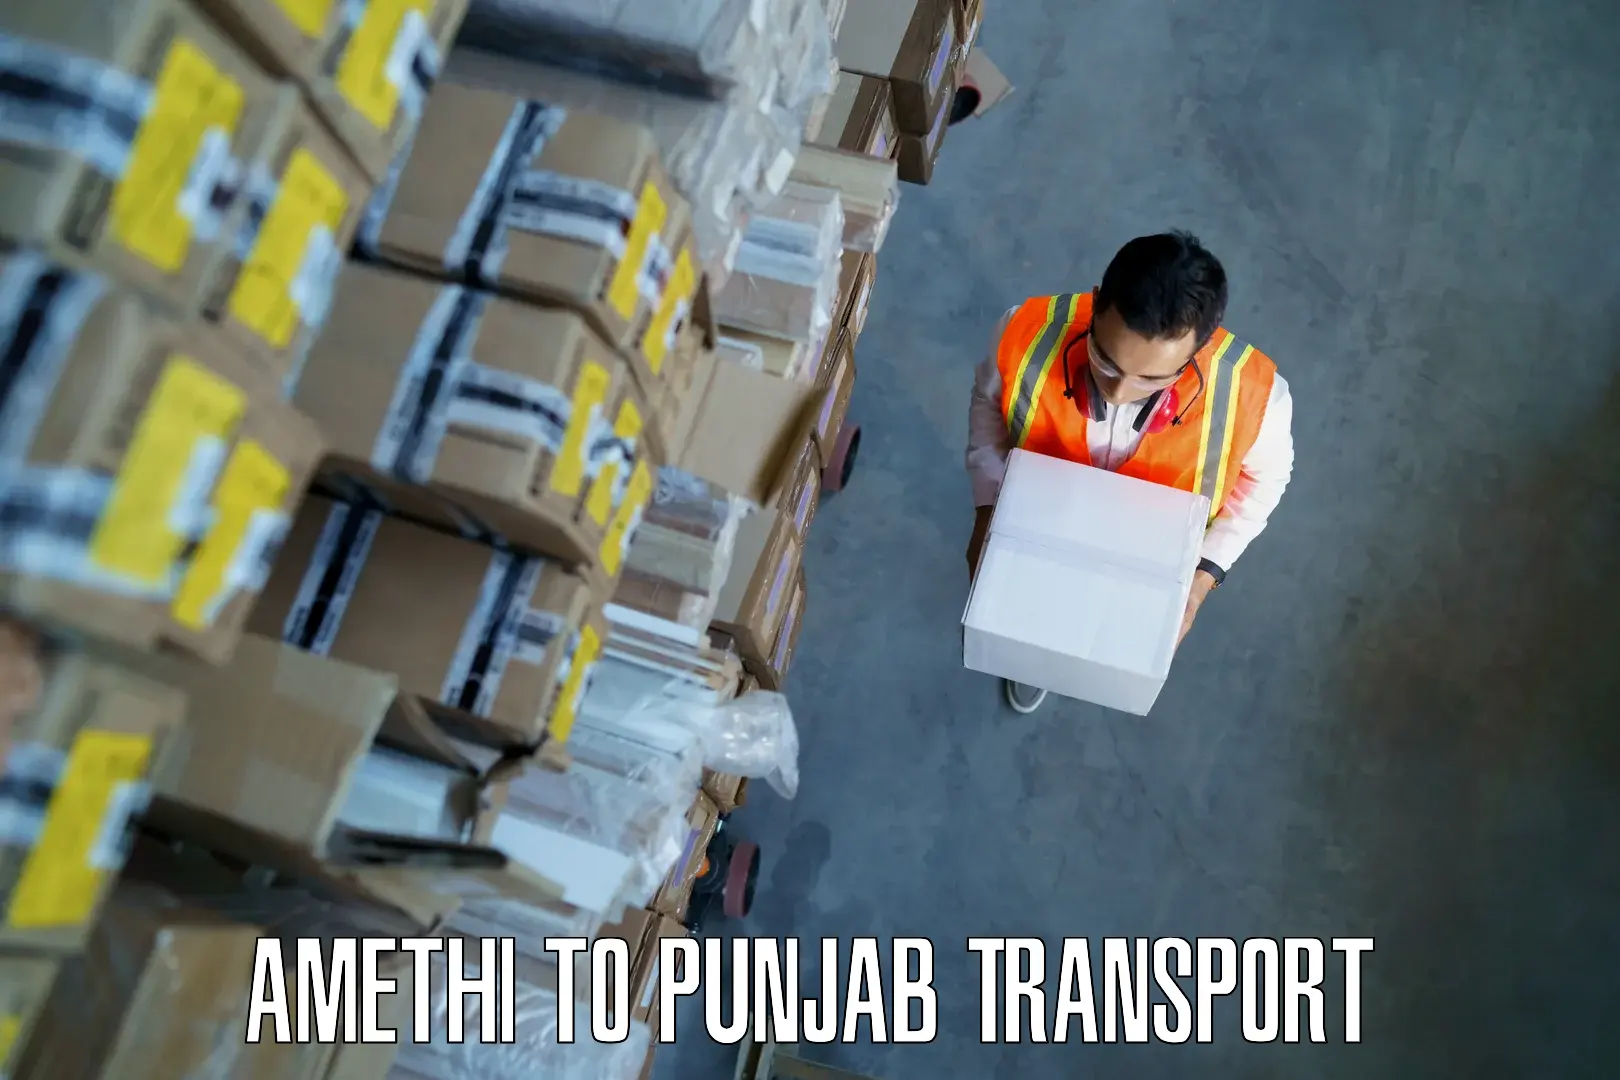 Daily parcel service transport Amethi to Sirhind Fatehgarh